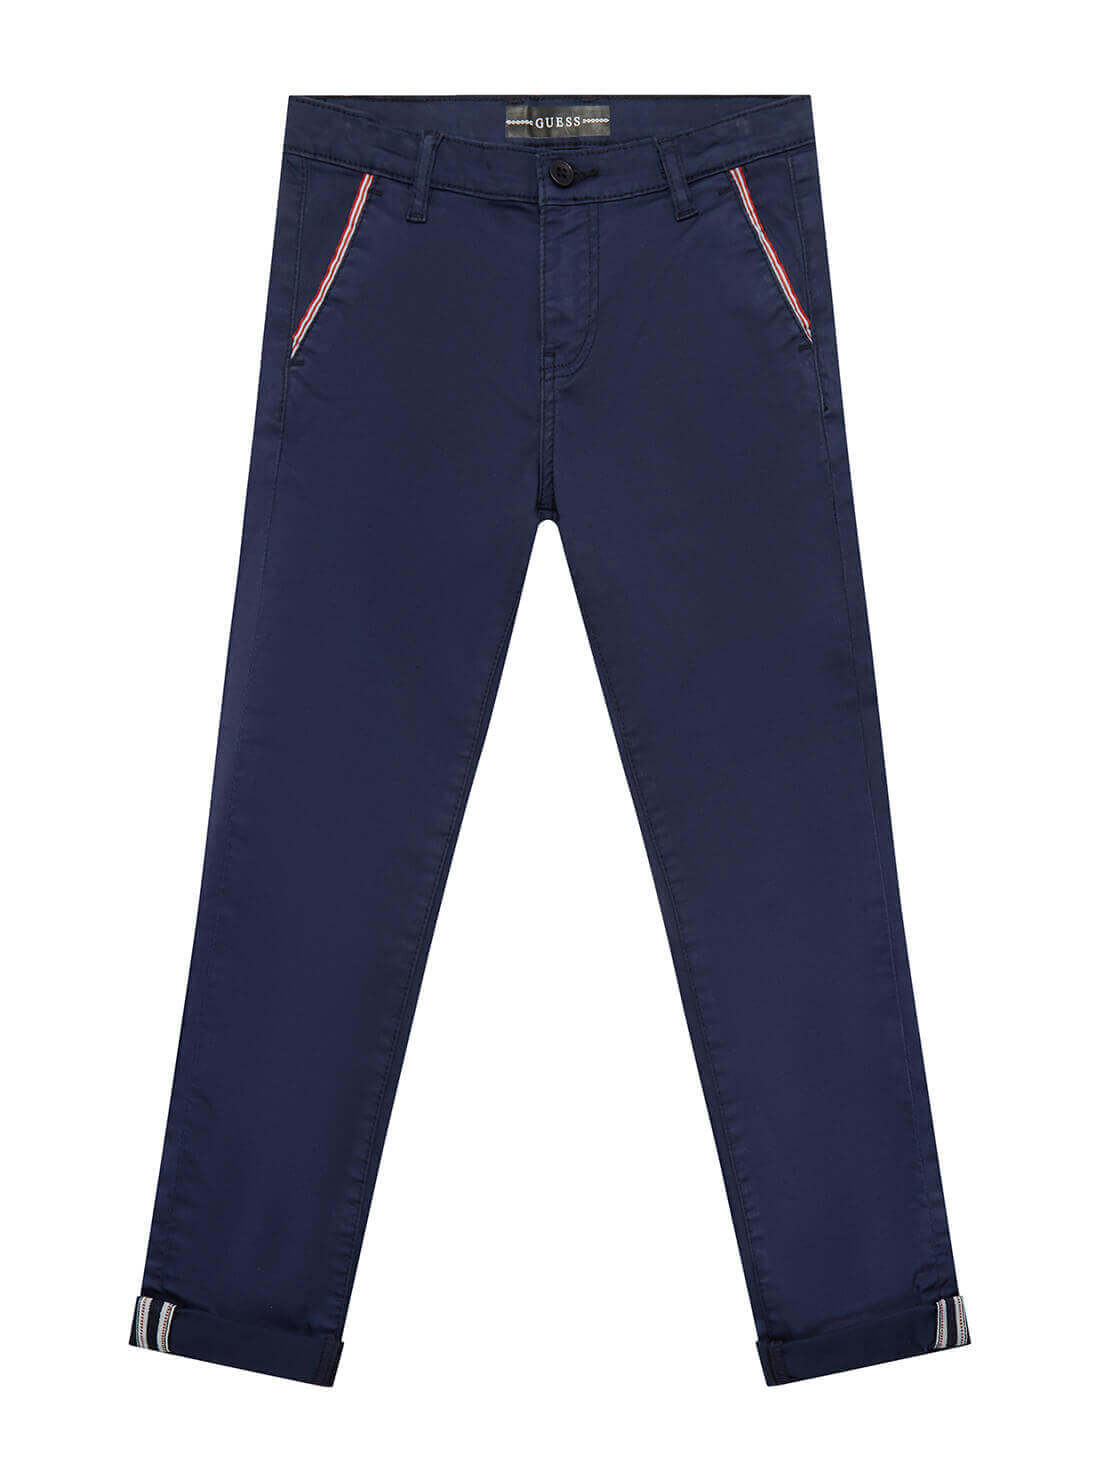 GUESS Little Boys Navy Blue Sateen Slim Chino Pants (2-7) N1YB00WE2W0 Front View